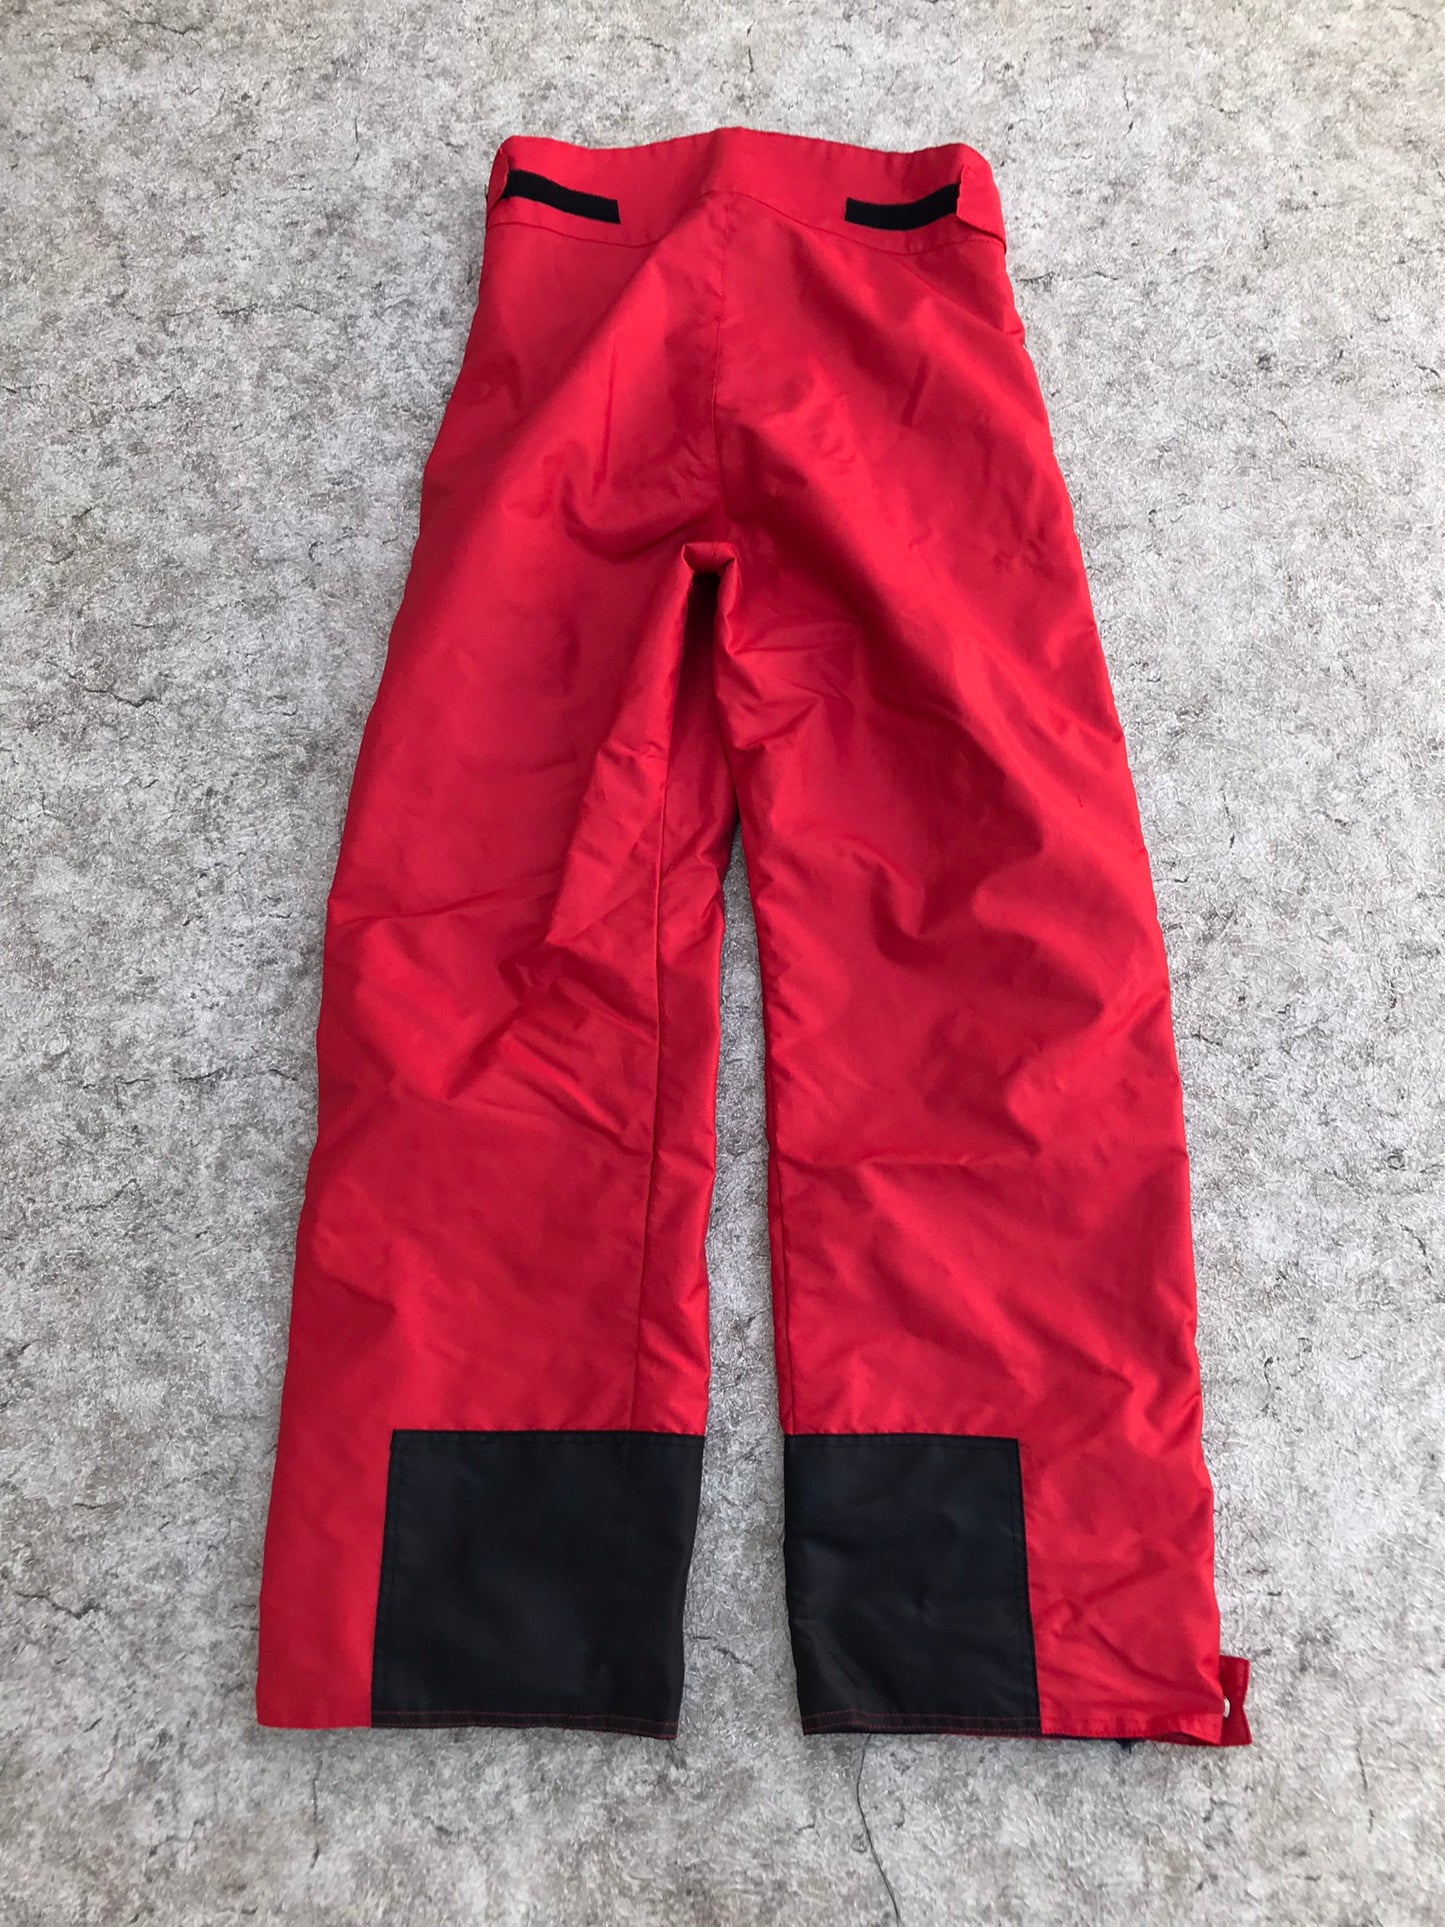 Snow Pants Men's Size Medium Waterproof Shell Full Zippers Up Both Legs As New  As New